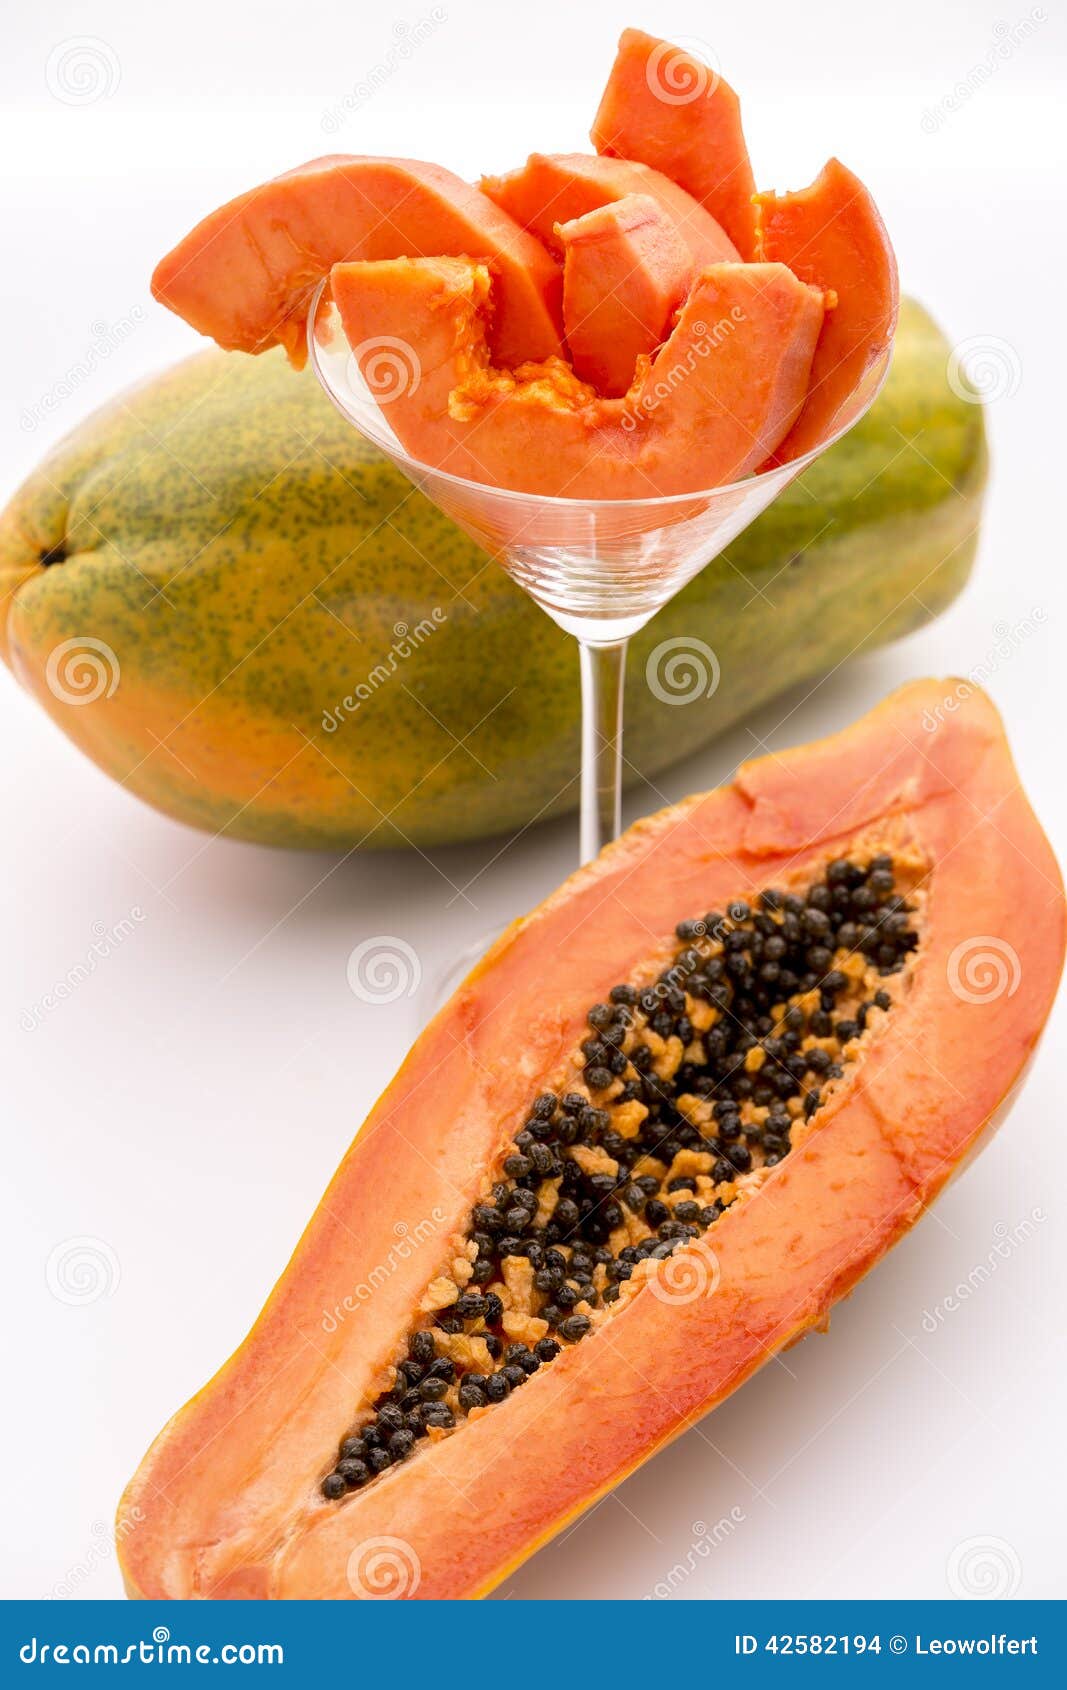 Papaya - a popular breakfast fruit. The oblong shape of half a papaya and its fruit flesh in a glass. The depth of field is running across both the papaya slices and the pulp revealed by the longitudinal section of the halved fruit.